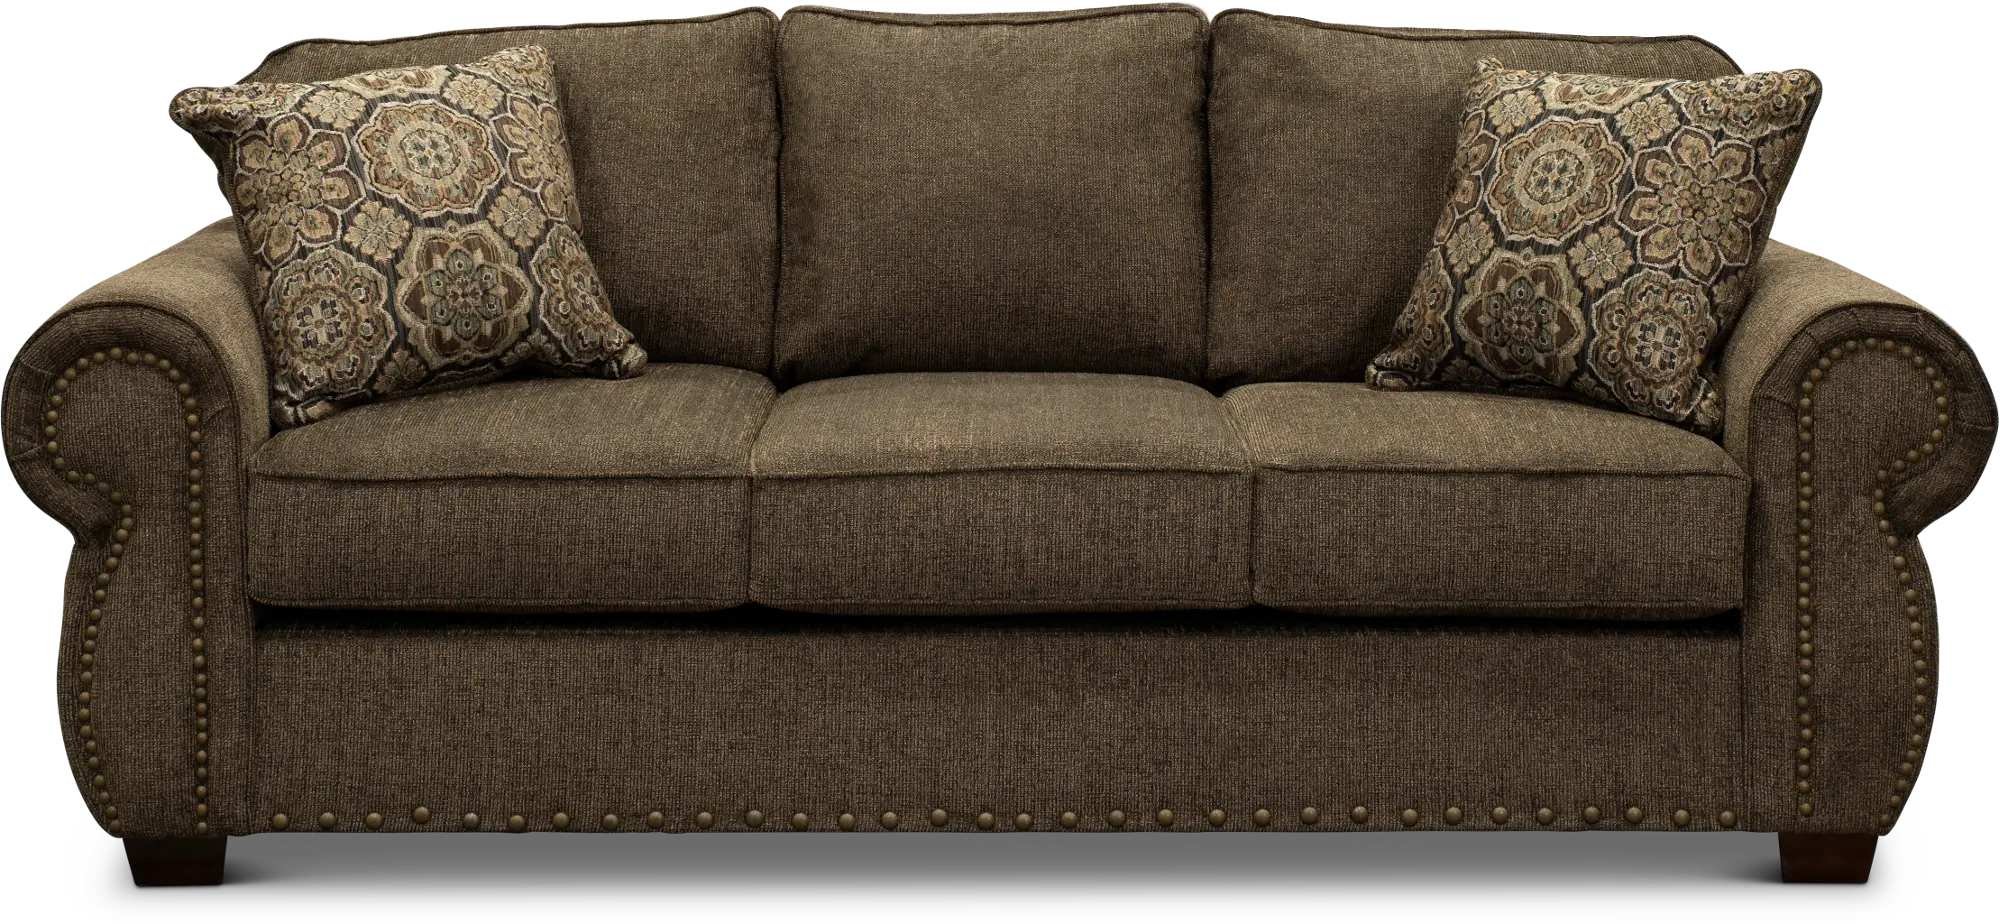 Southport Brown Sofa Bed